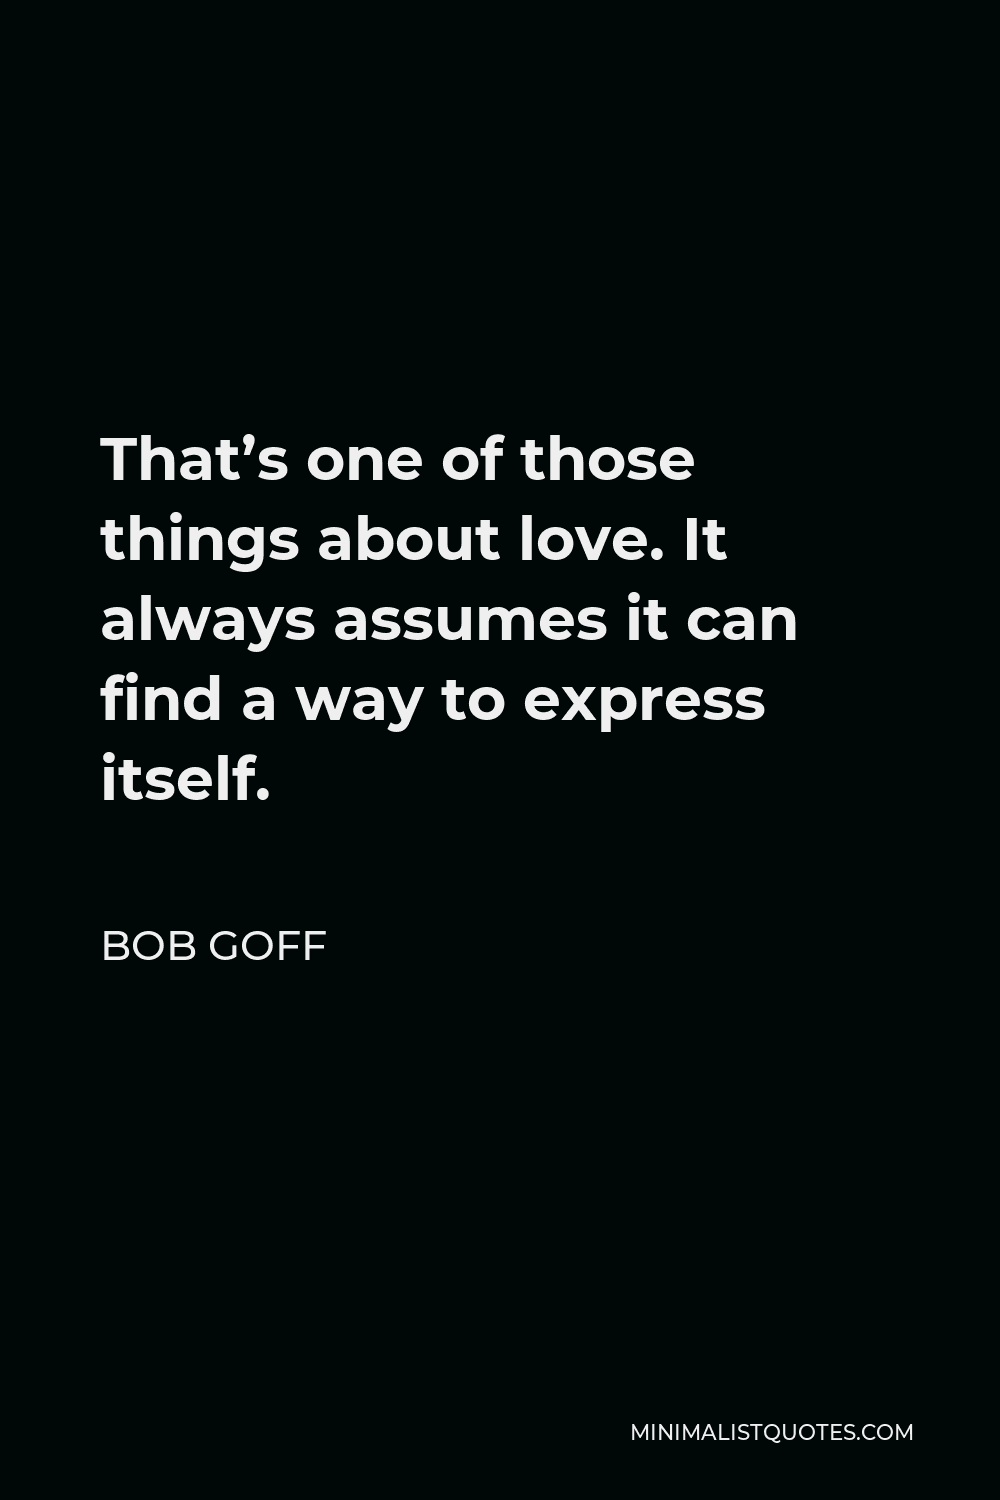 Bob Goff Quote - That’s one of those things about love. It always assumes it can find a way to express itself.